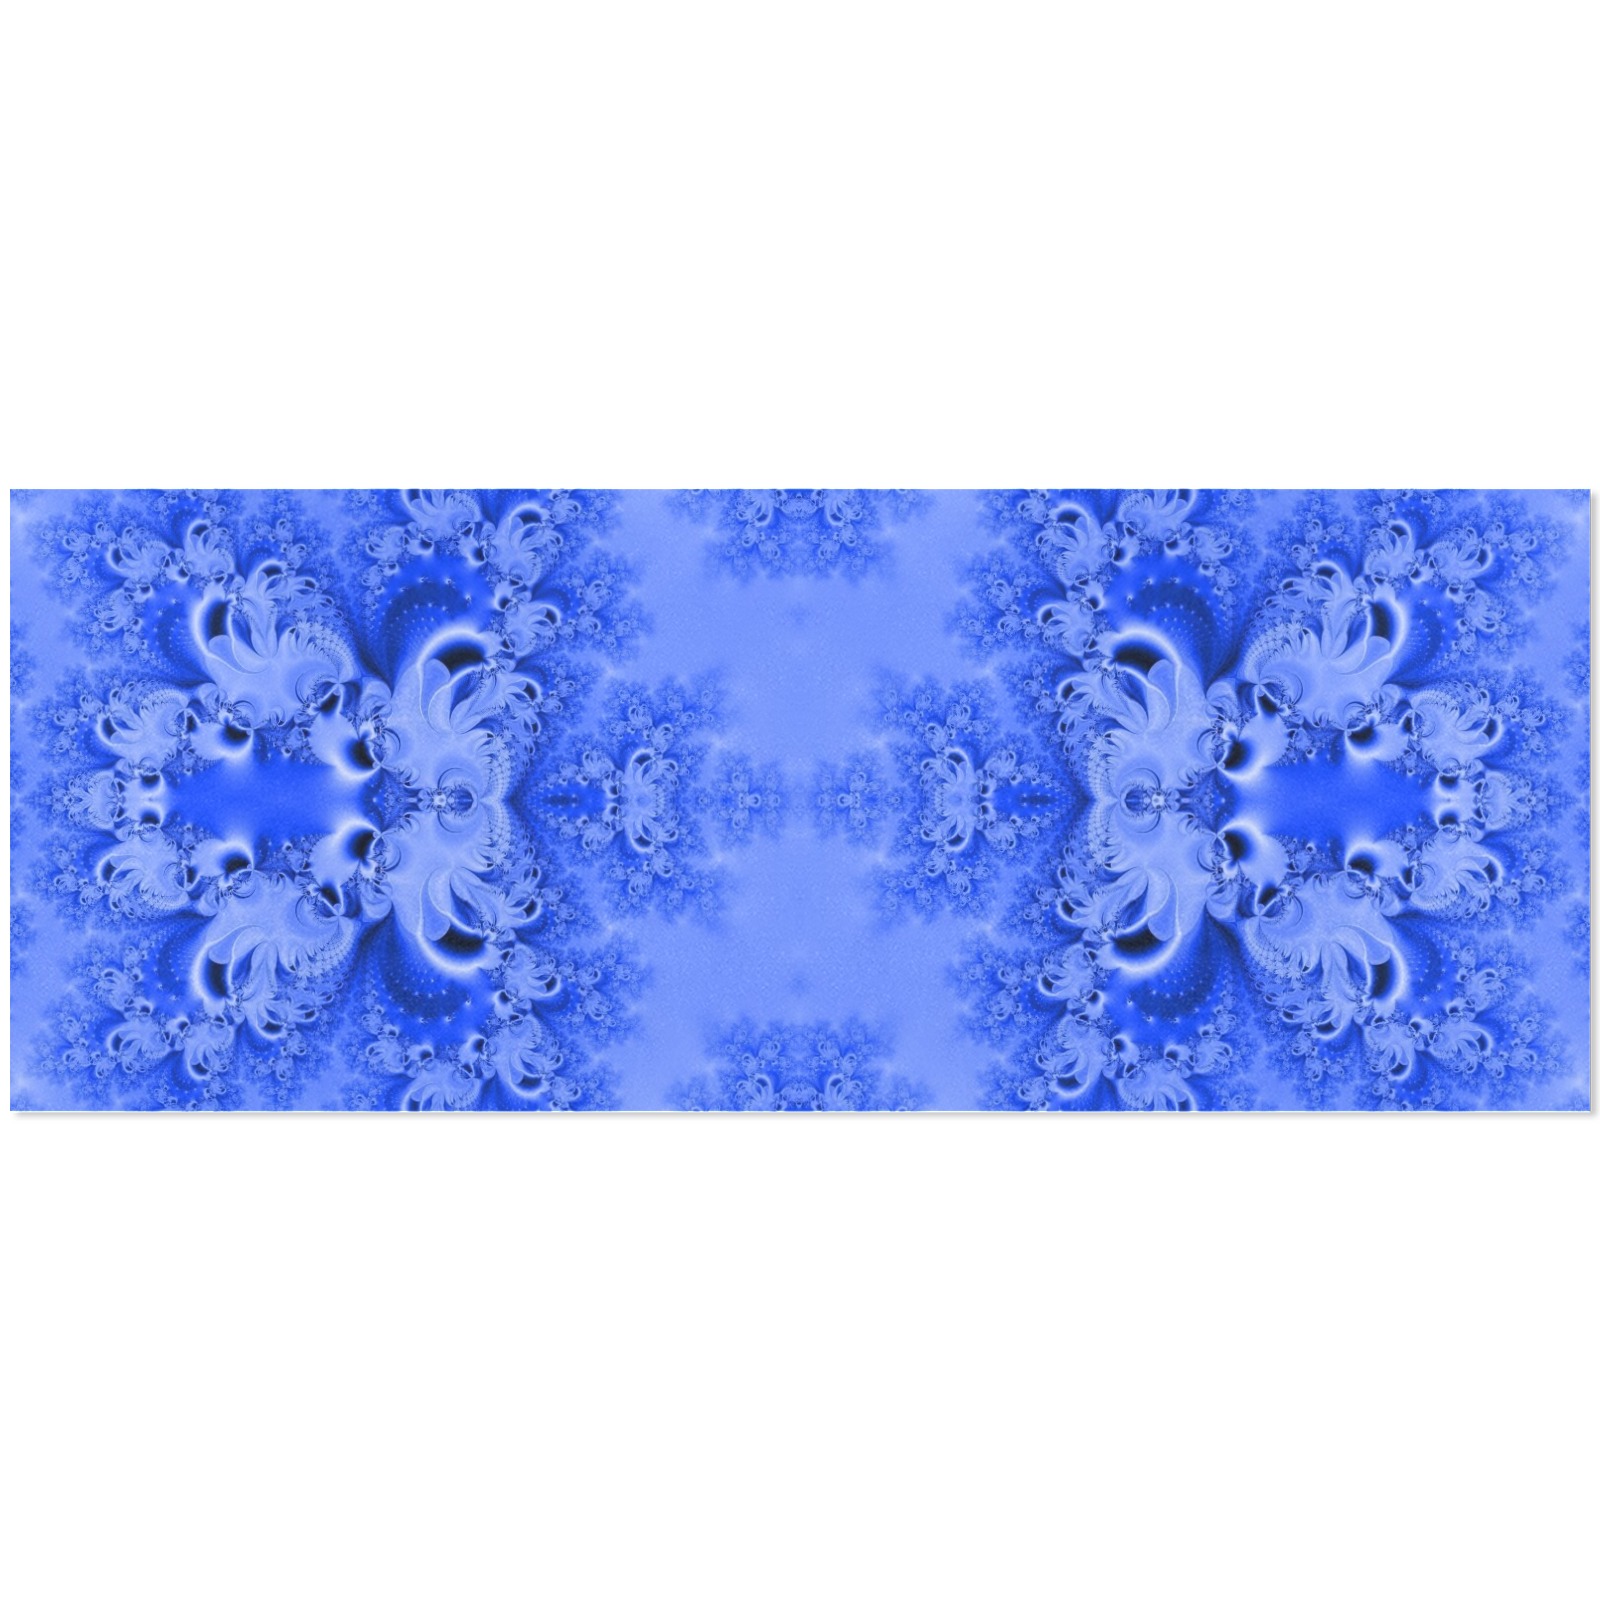 Blue Sky over the Bluebells Frost Fractal Gift Wrapping Paper 58"x 23" (2 Rolls)